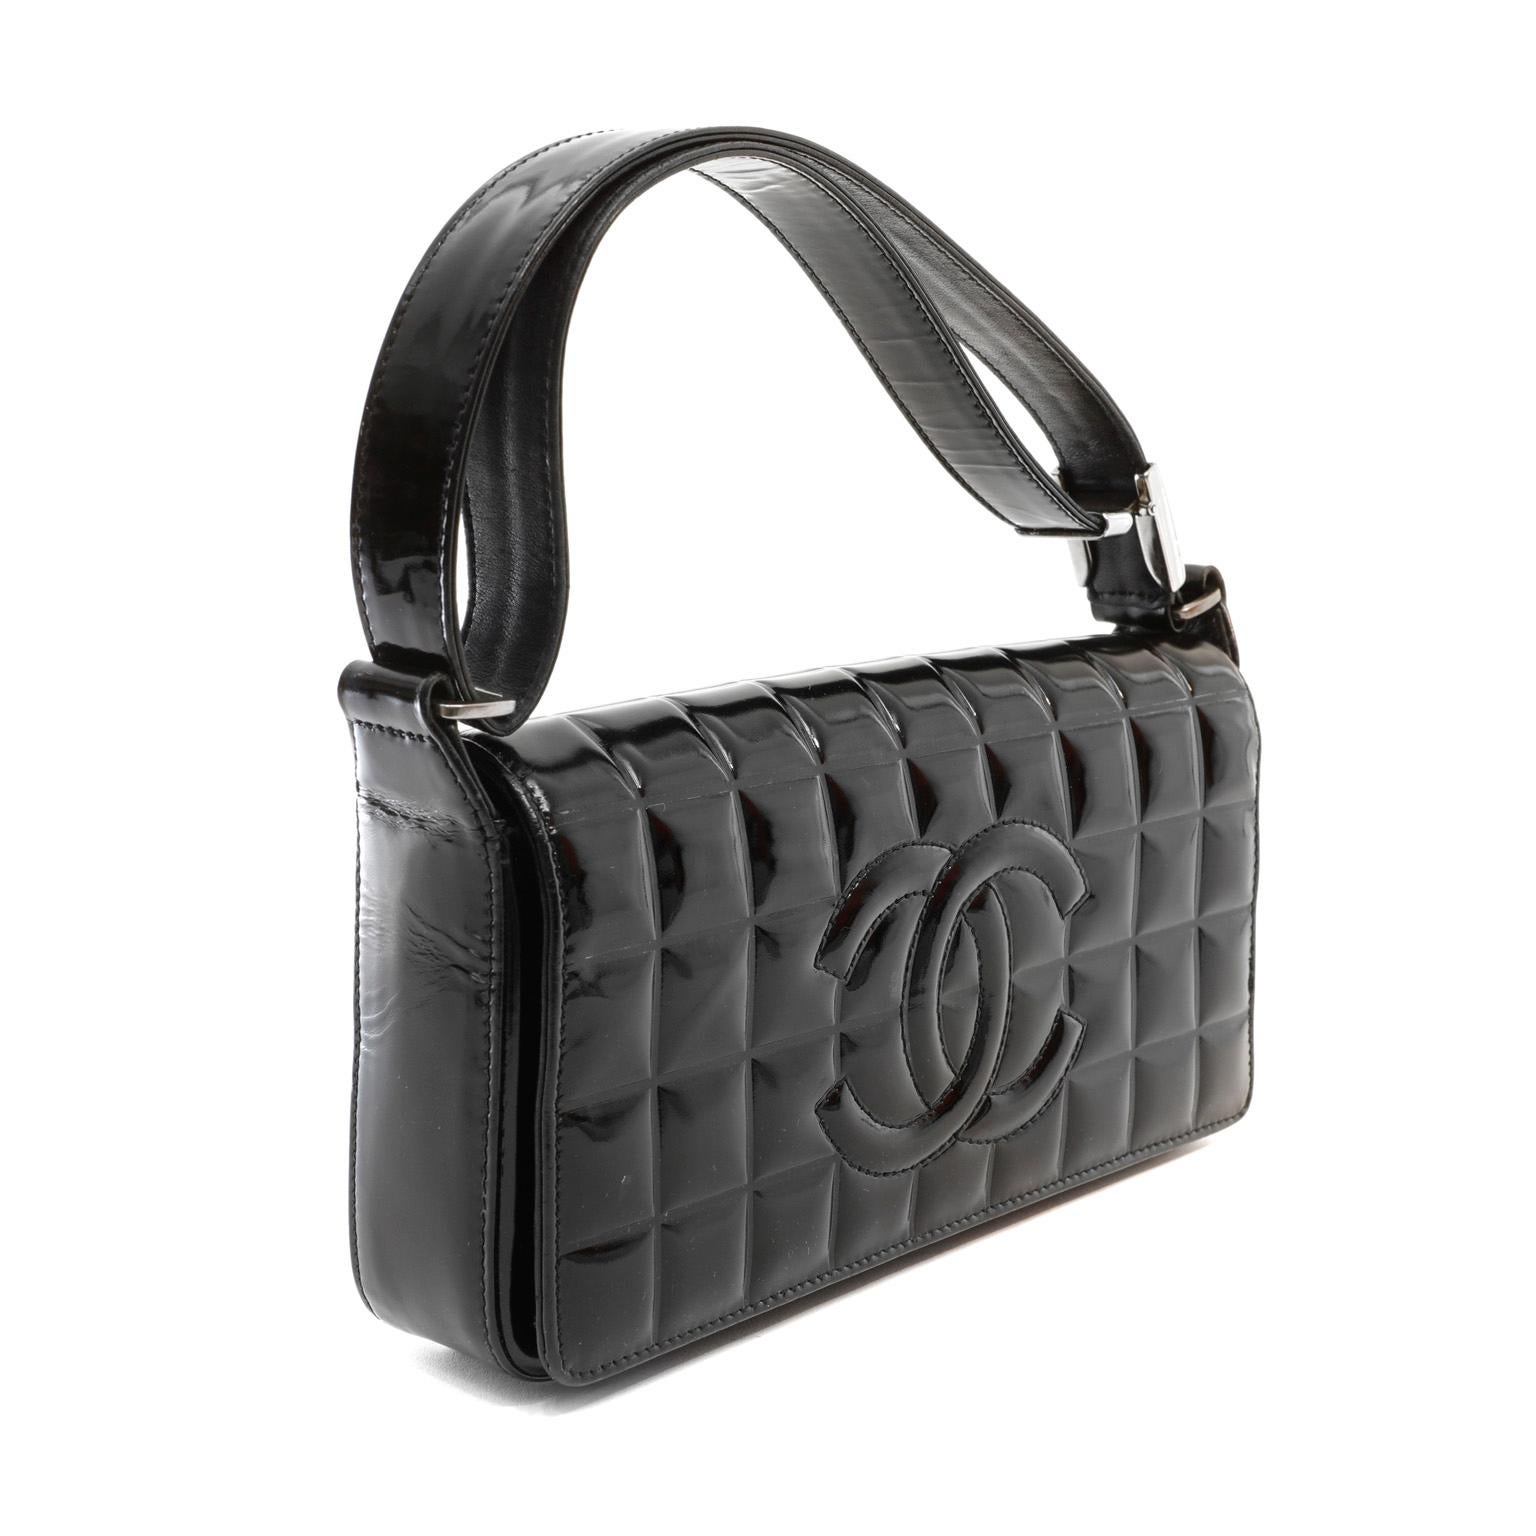 This authentic Chanel Black Patent Leather Chocolate Bar Quilted CC Shoulder Bag is in mint condition.  Weather friendly black patent leather is quilted in square chocolate bar pattern.  Large tonal interlocking CC is stitched on the front flap. 